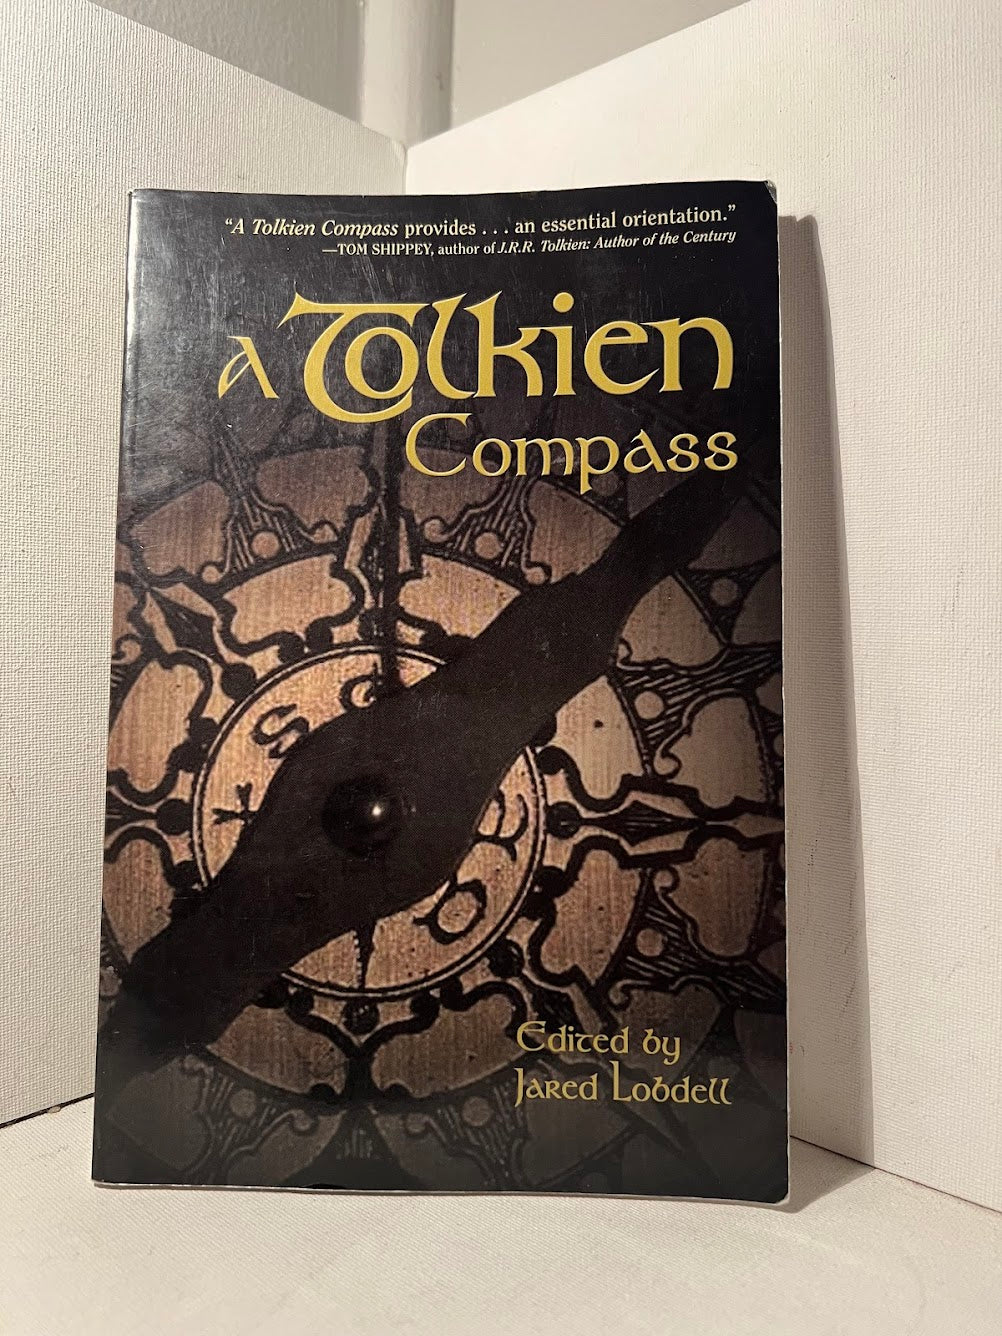 A Tolkien Compass edited by Jared Loodell